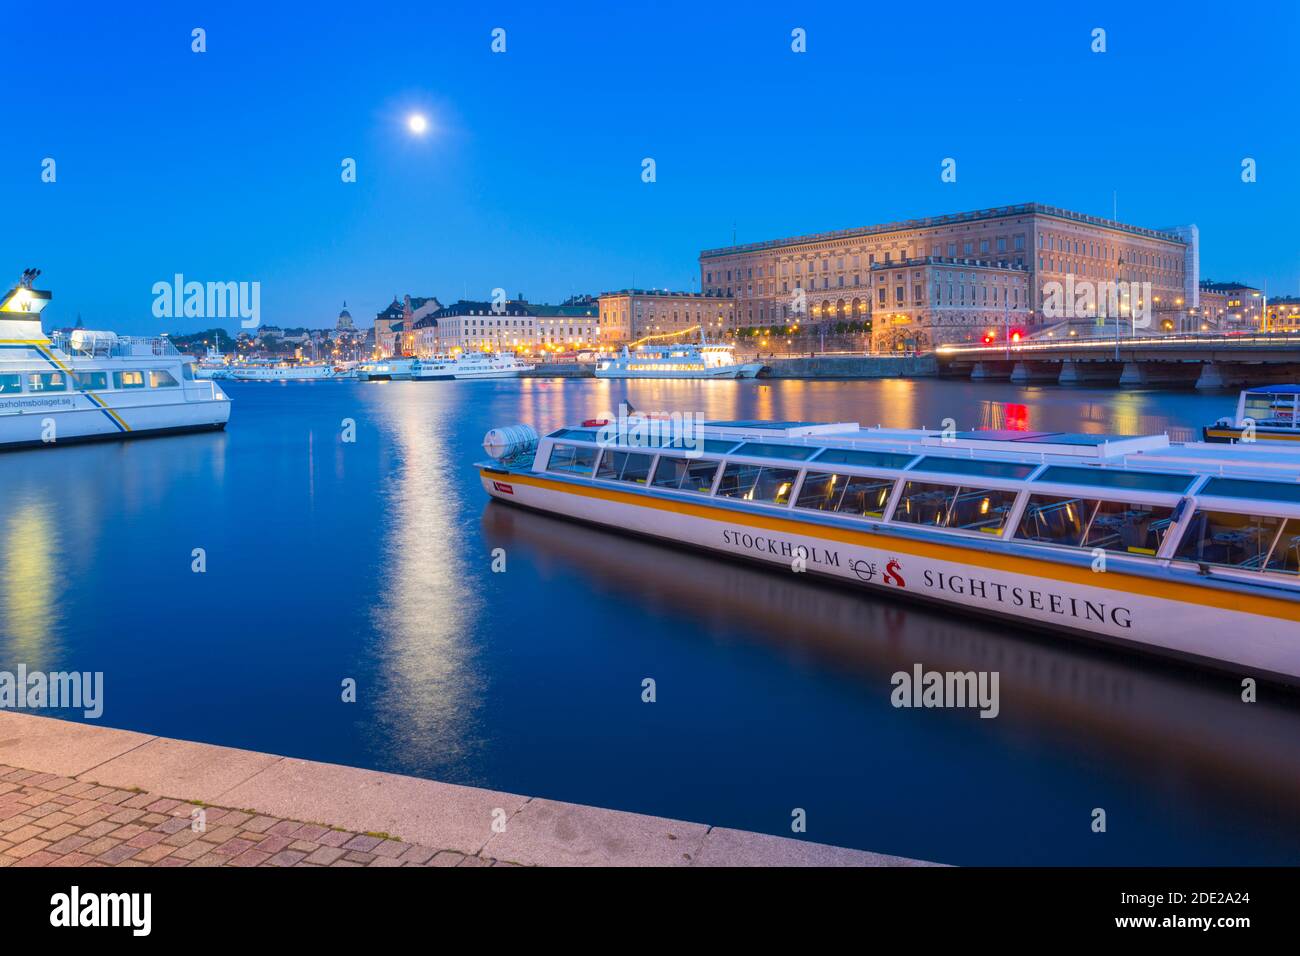 The Royal Palace and sightseeing boats at dusk, Stockholm, Sweden, Scandinavia, Europe Stock Photo